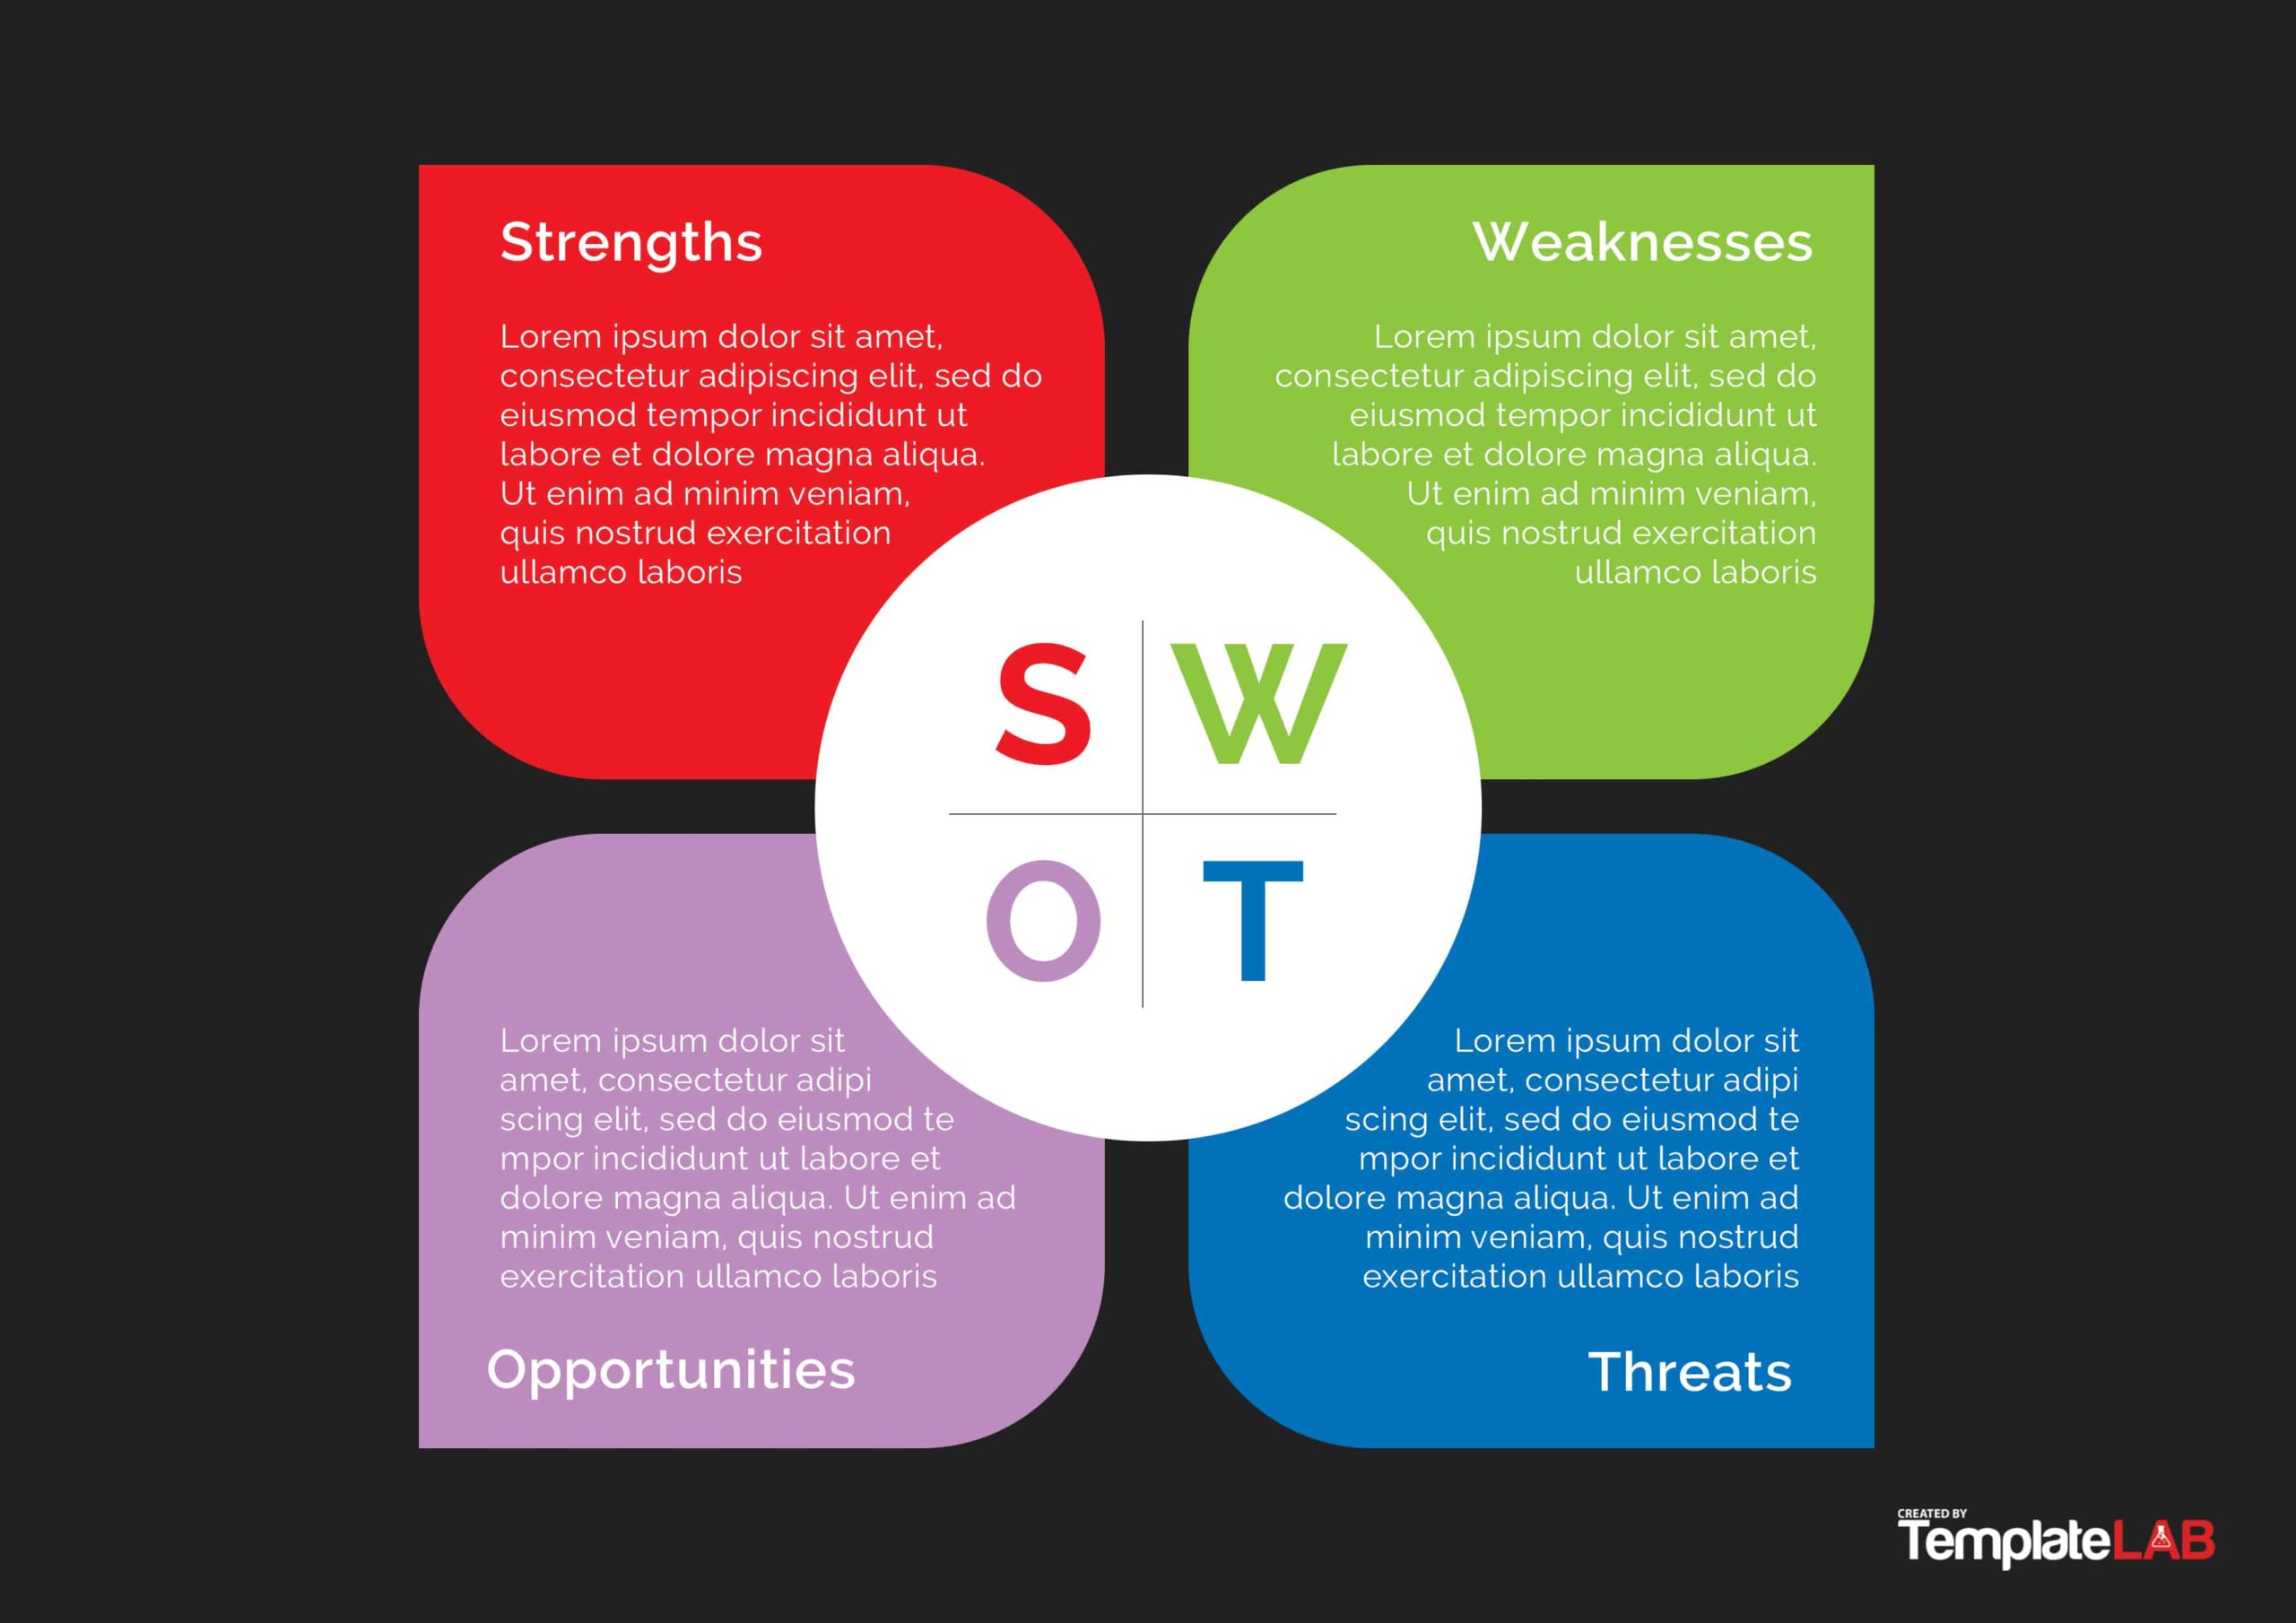 Swot Analysis Templates Editable Templates For Powerpoint Word Etc CLOUD HOT GIRL